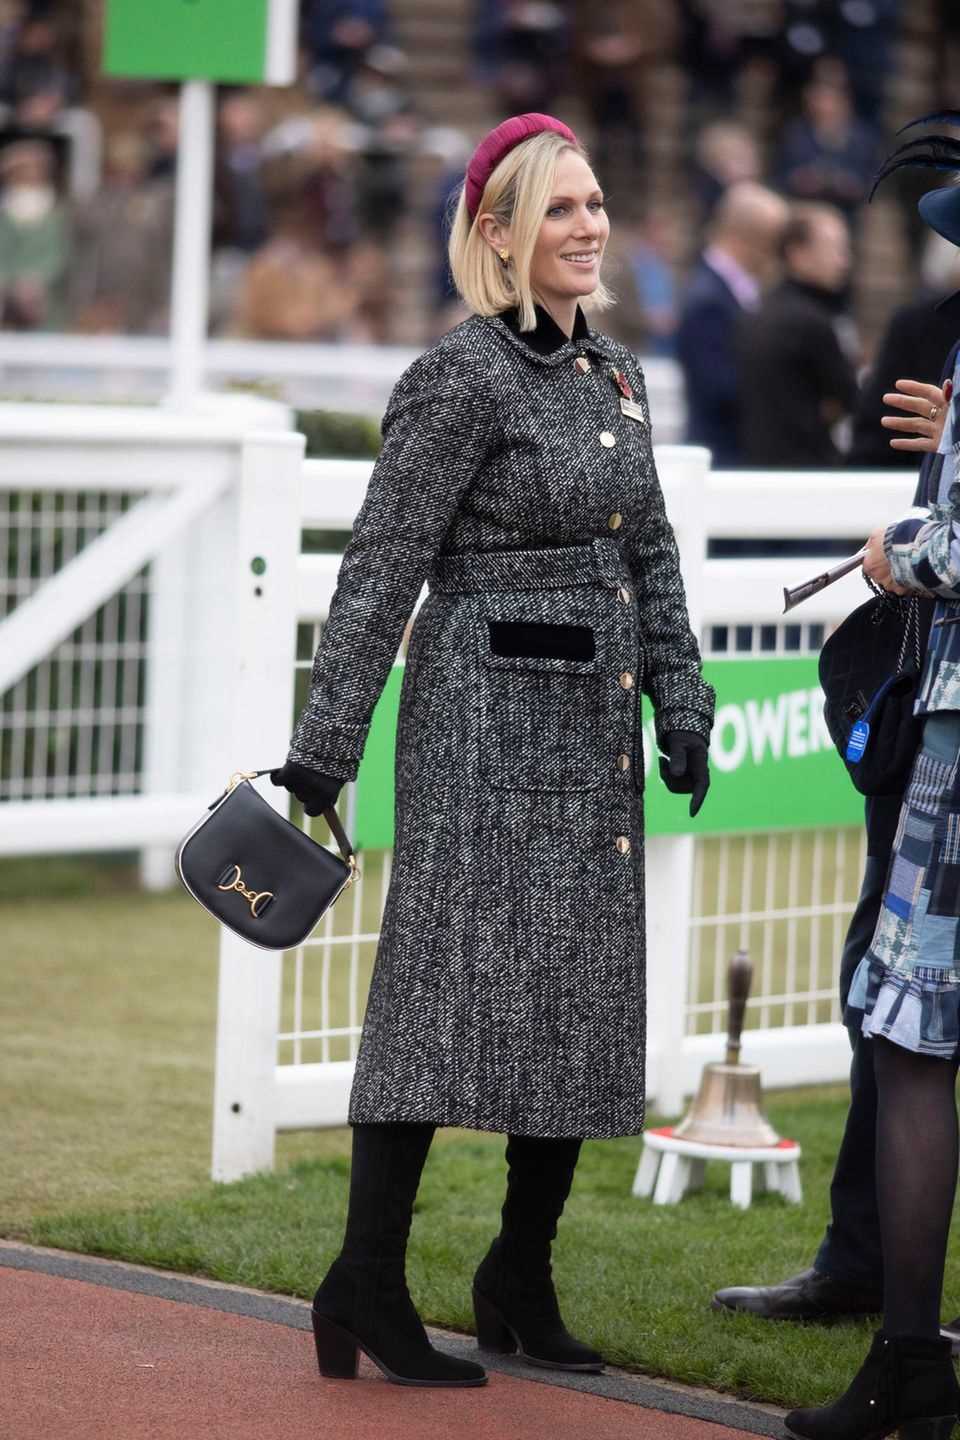 Velvet headband, mini handbag and tight-fitting bouclé coat: Zara Tindall's outfit is strongly reminiscent of Duchess Catherine's. 